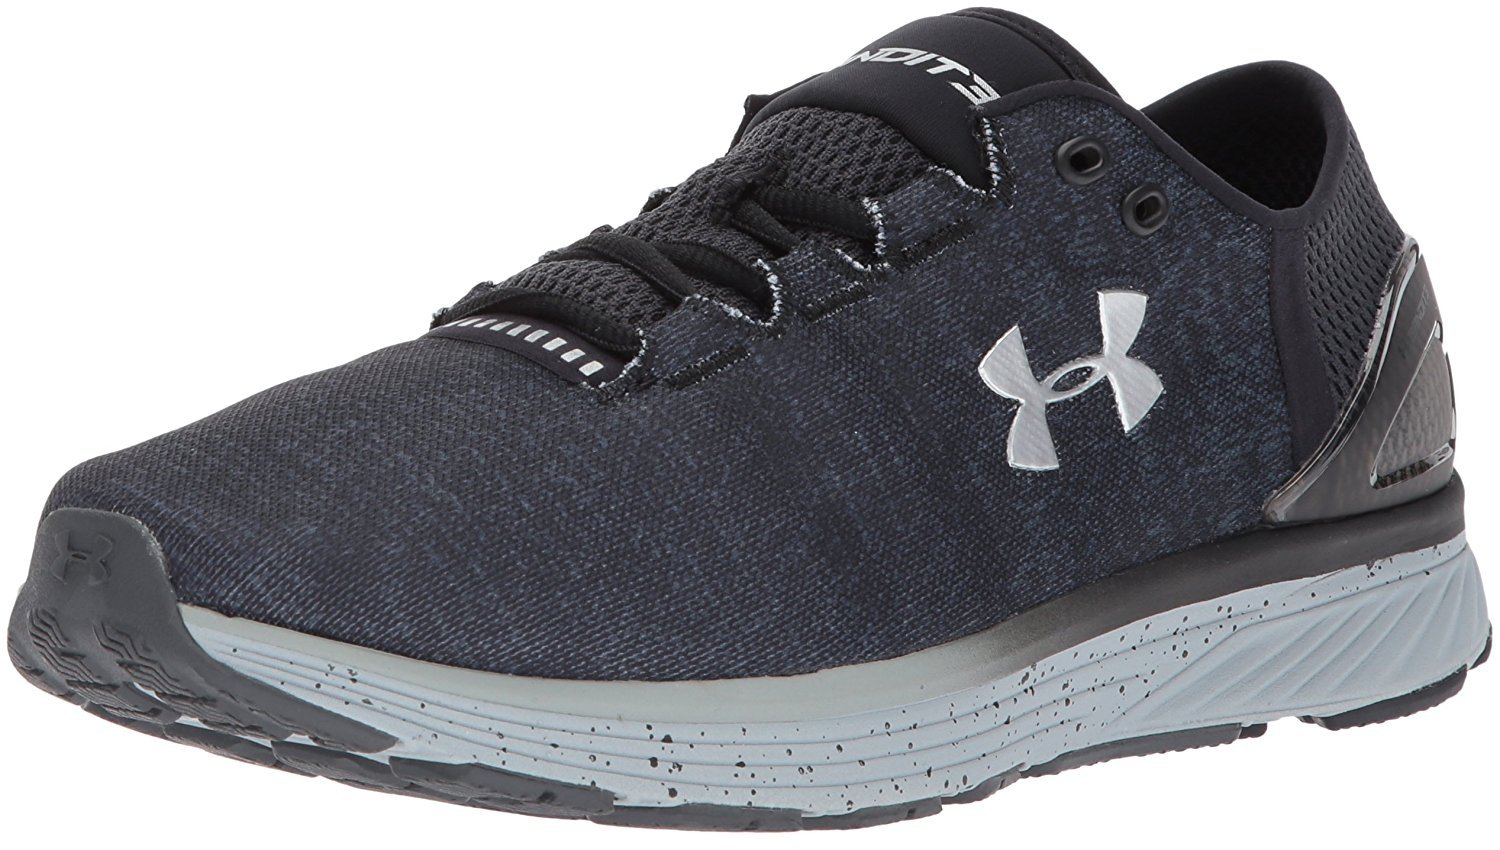 Under Armour Charged Bandit Shoe | eBay